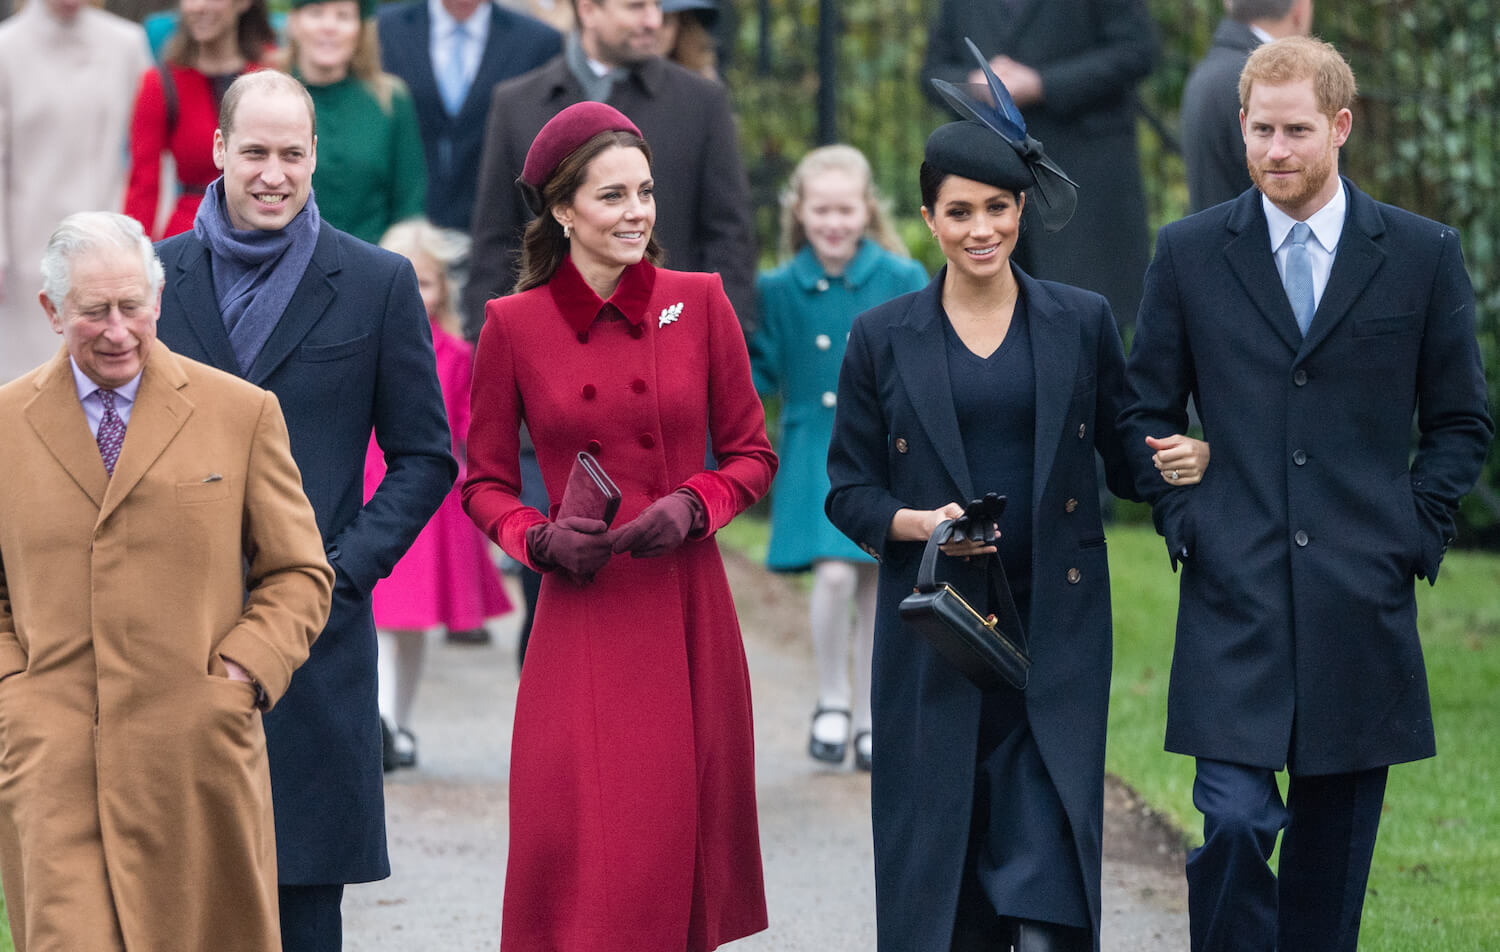 King Charles walks with Prince William, Kate Middleton, Meghan Markle, and Prince Harry outside